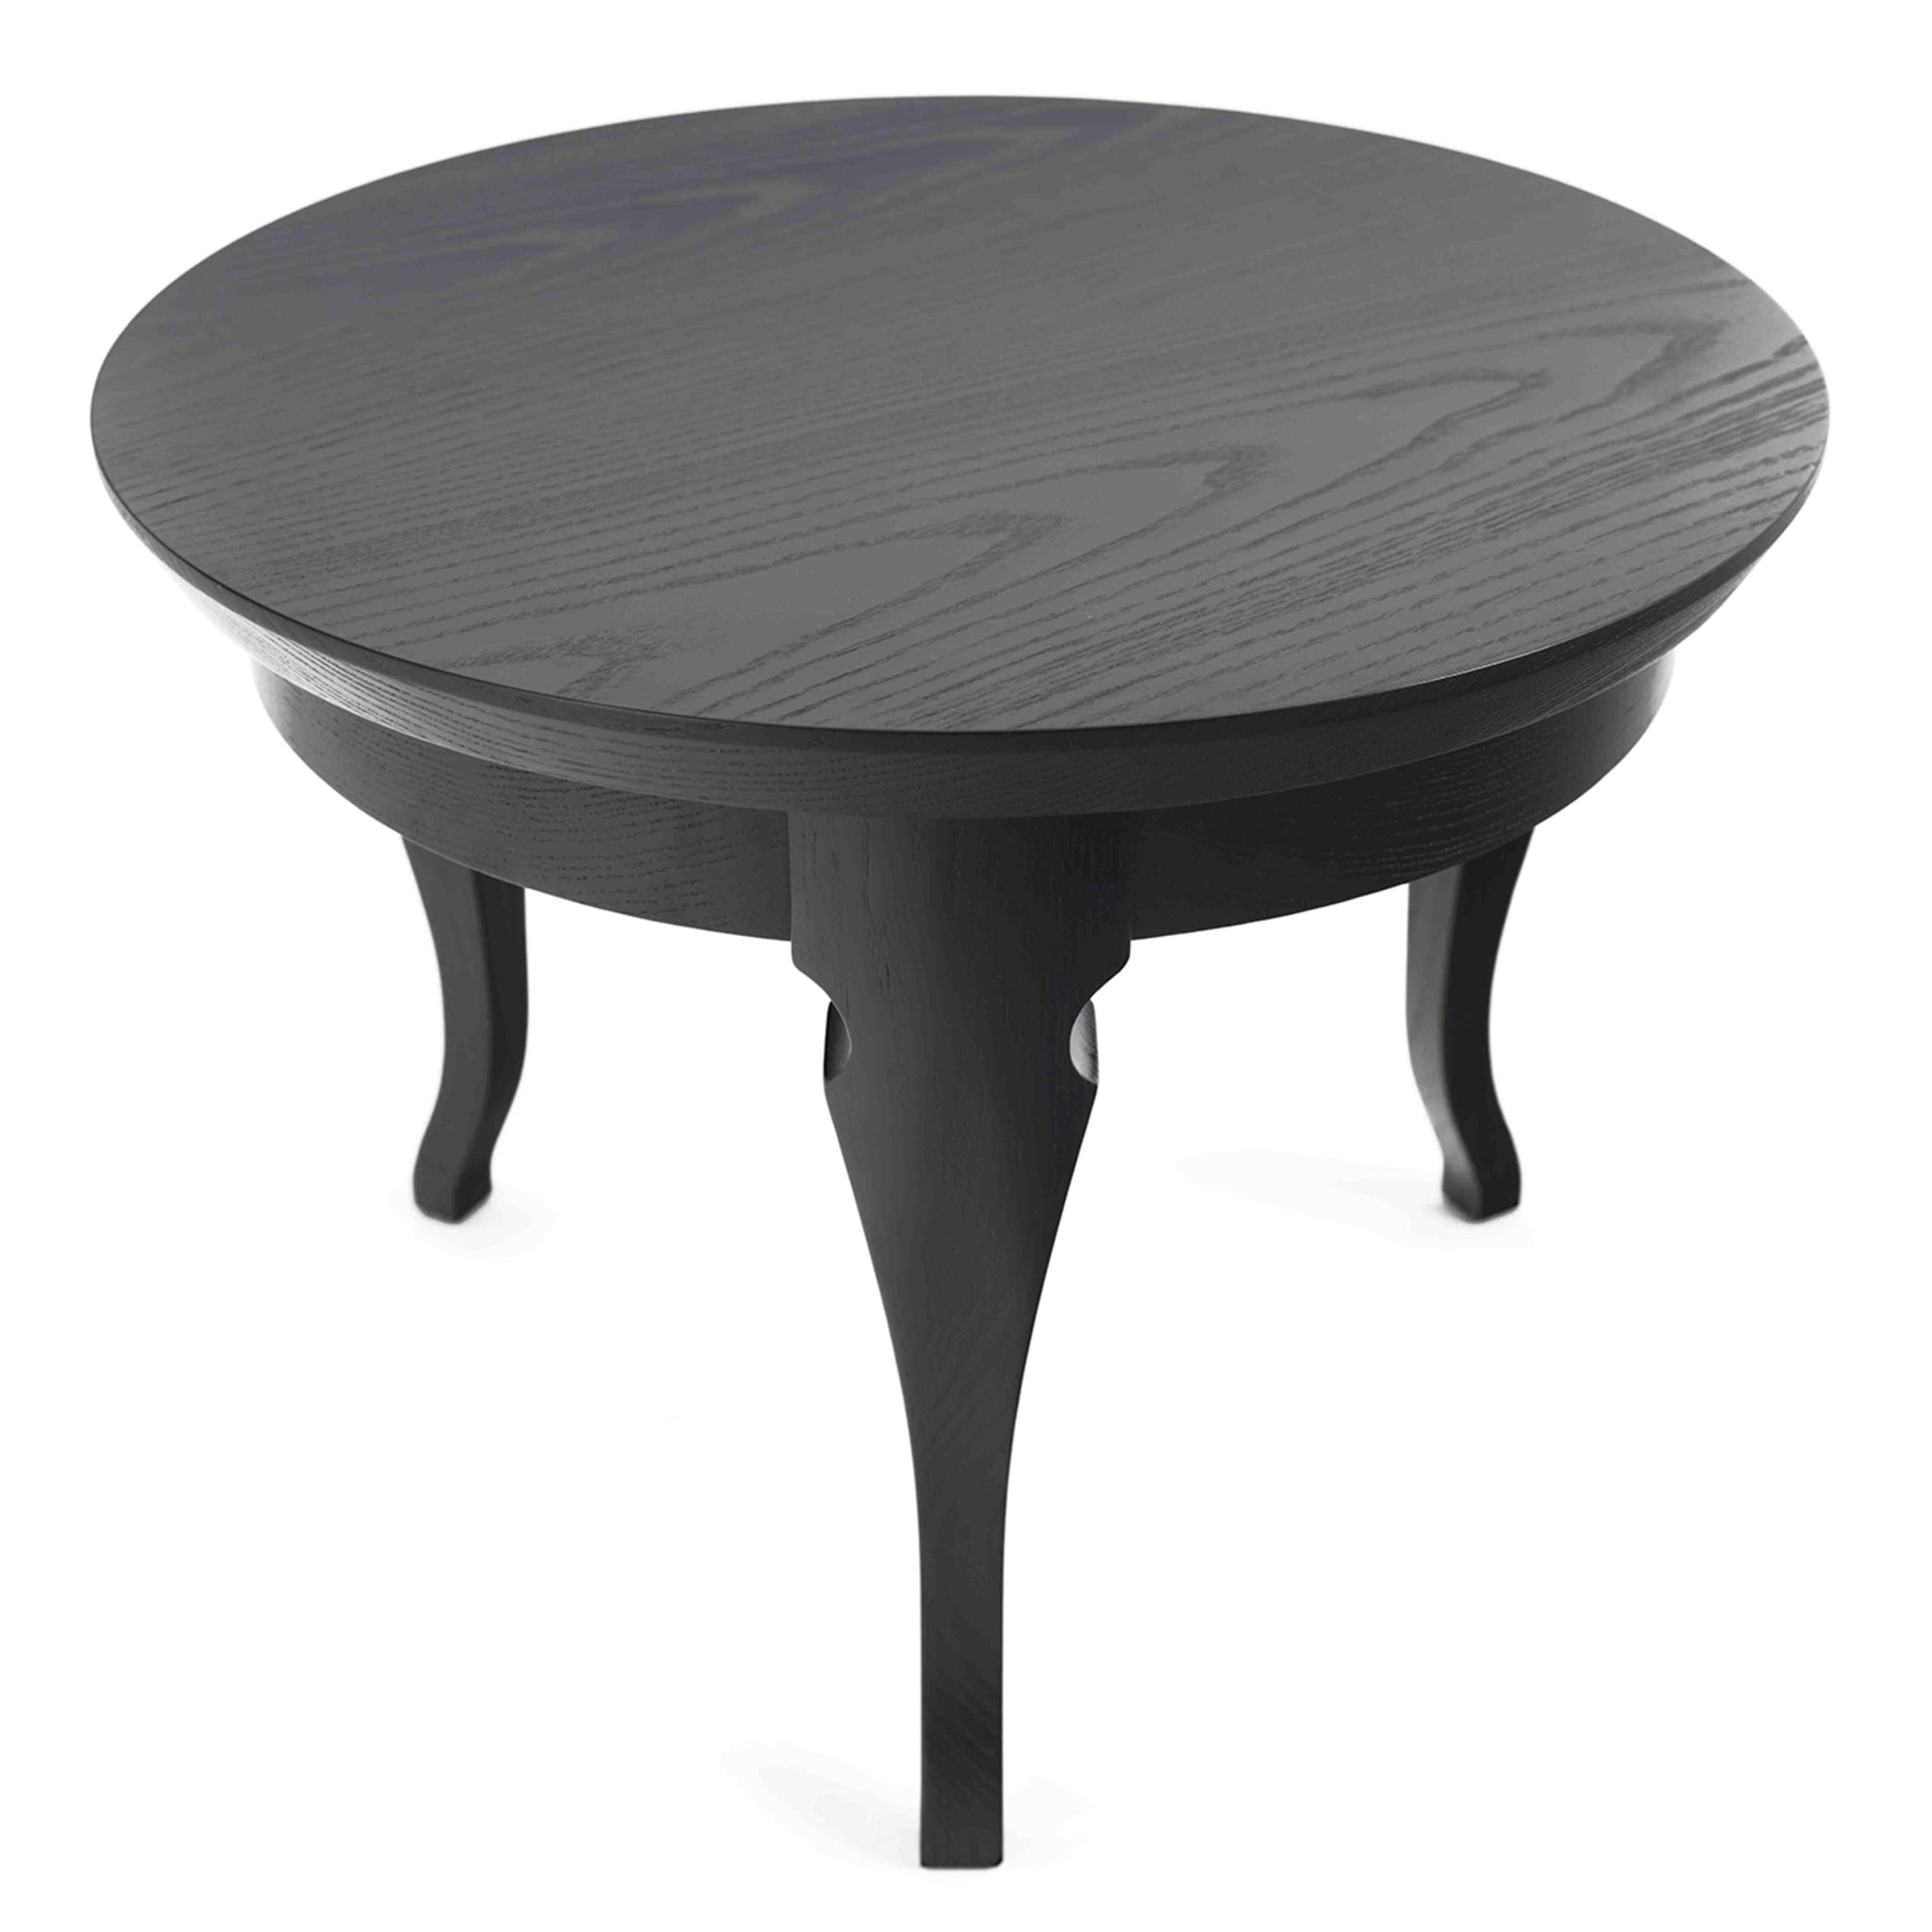 Dolcevita Small Round Side Table - Alternative view 1